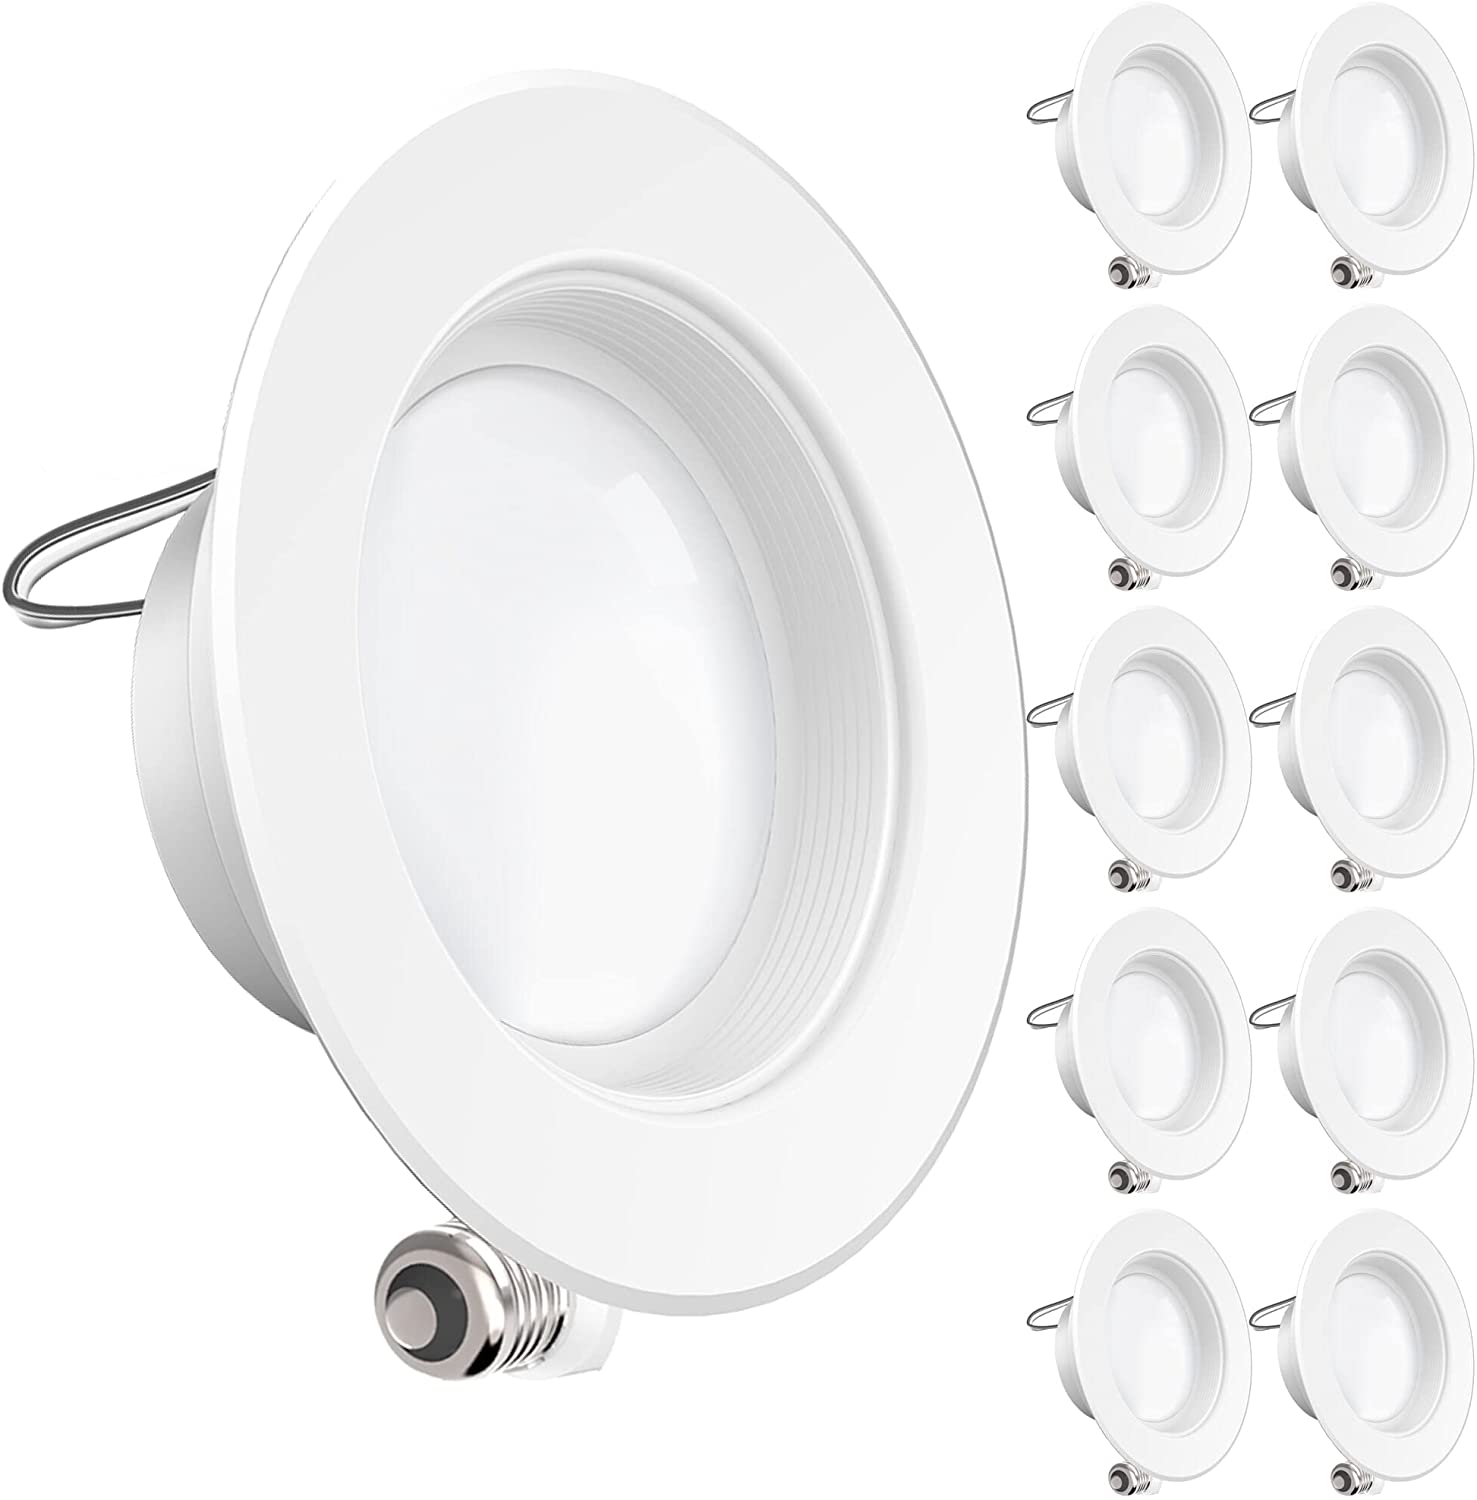 Sunco Lighting 10 Pack 4 Inch LED Recessed Downlight